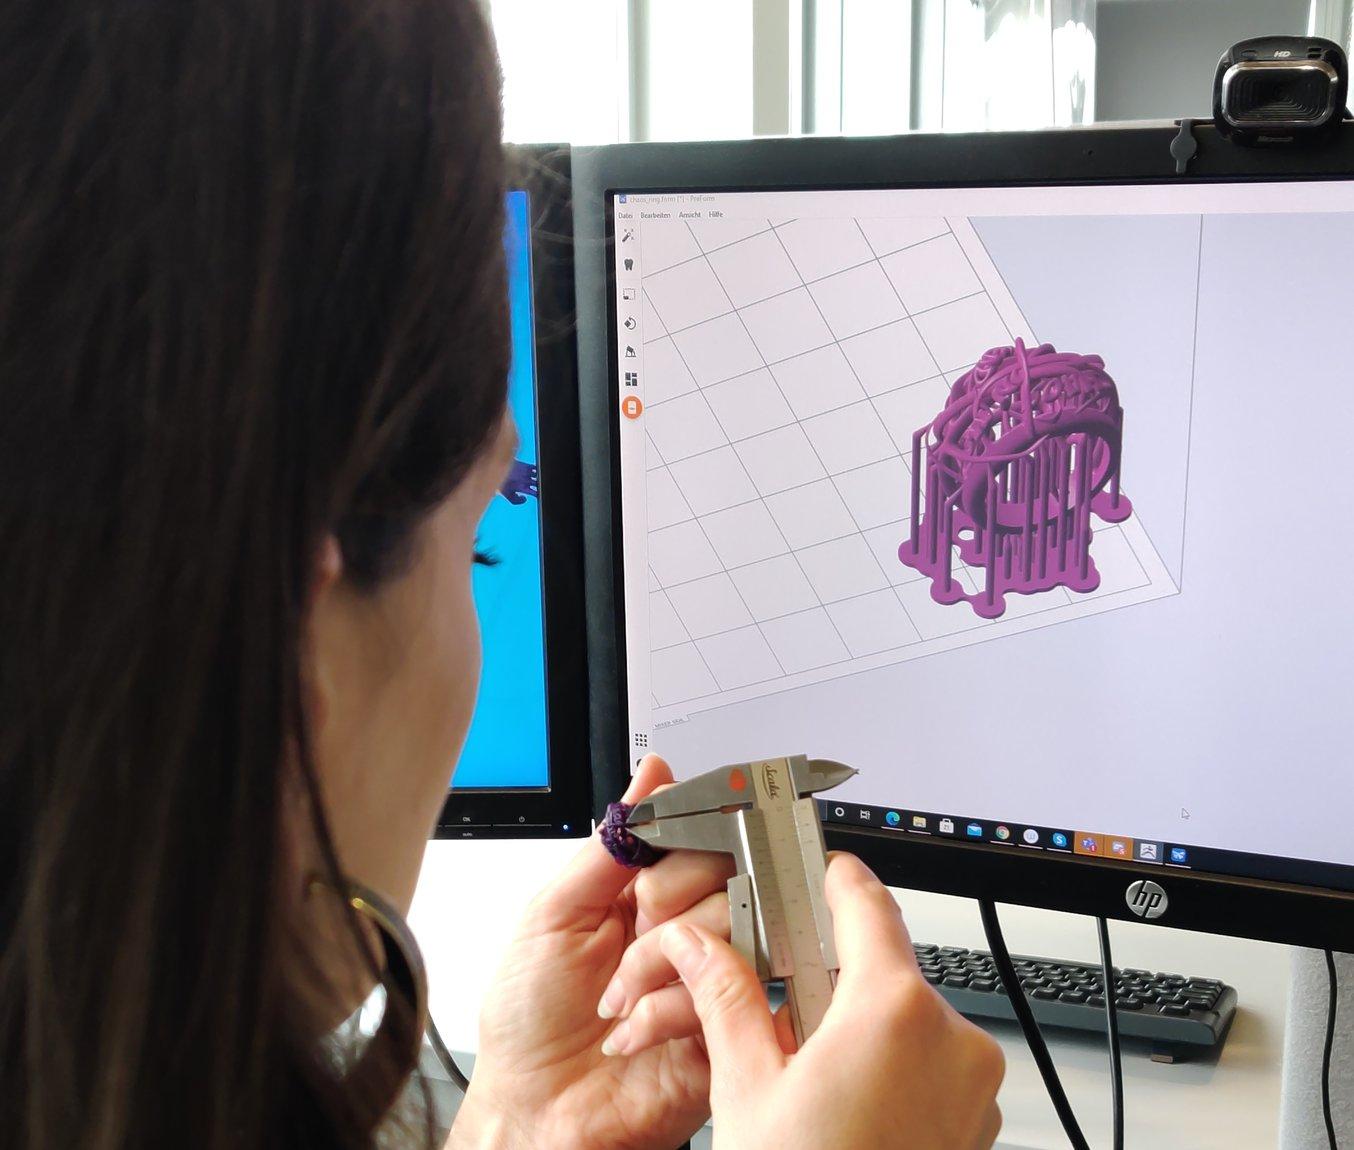 From soft skills such as creating digital designs and files with ZBrush to hard skills like printing and post-processing printed parts, students learn everything relevant to 3D printed jewelry.